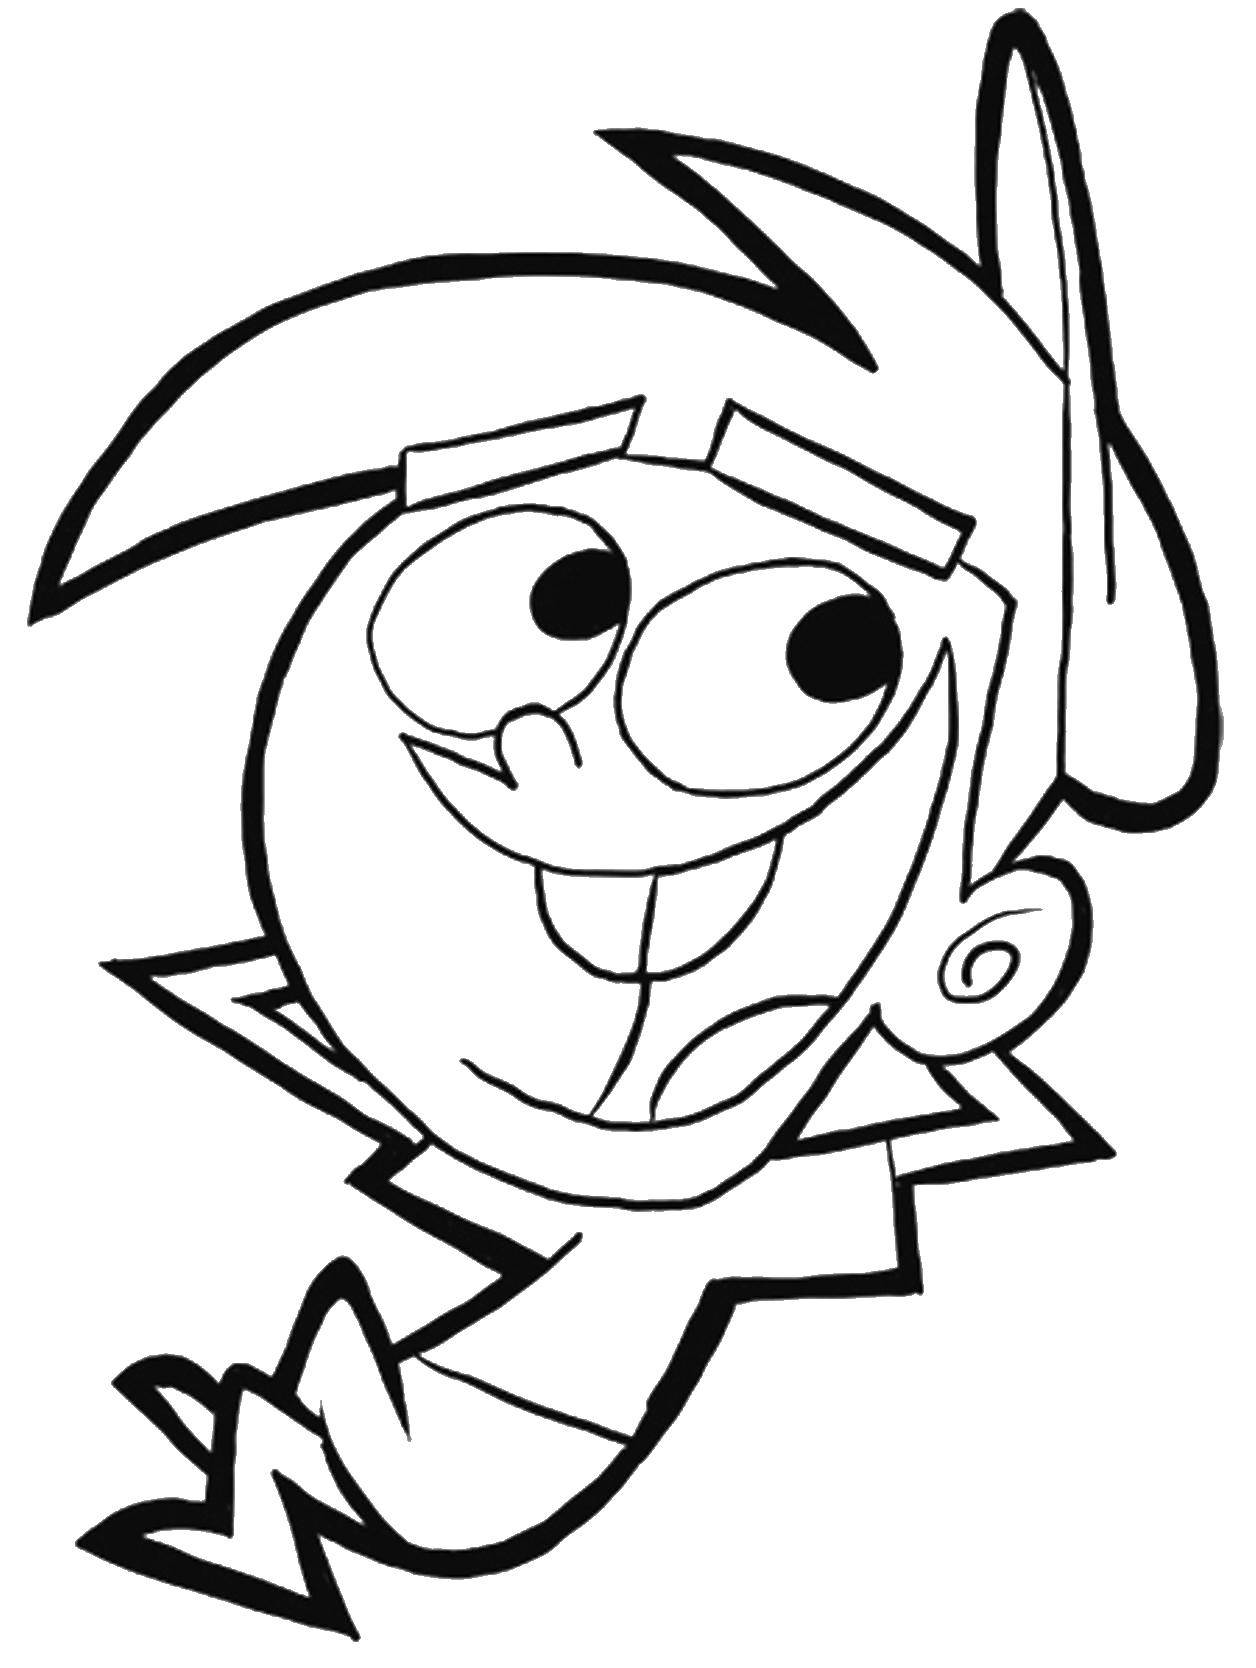 Coloring Timmy Turner. Category cartoons. Tags:  Magic parents.